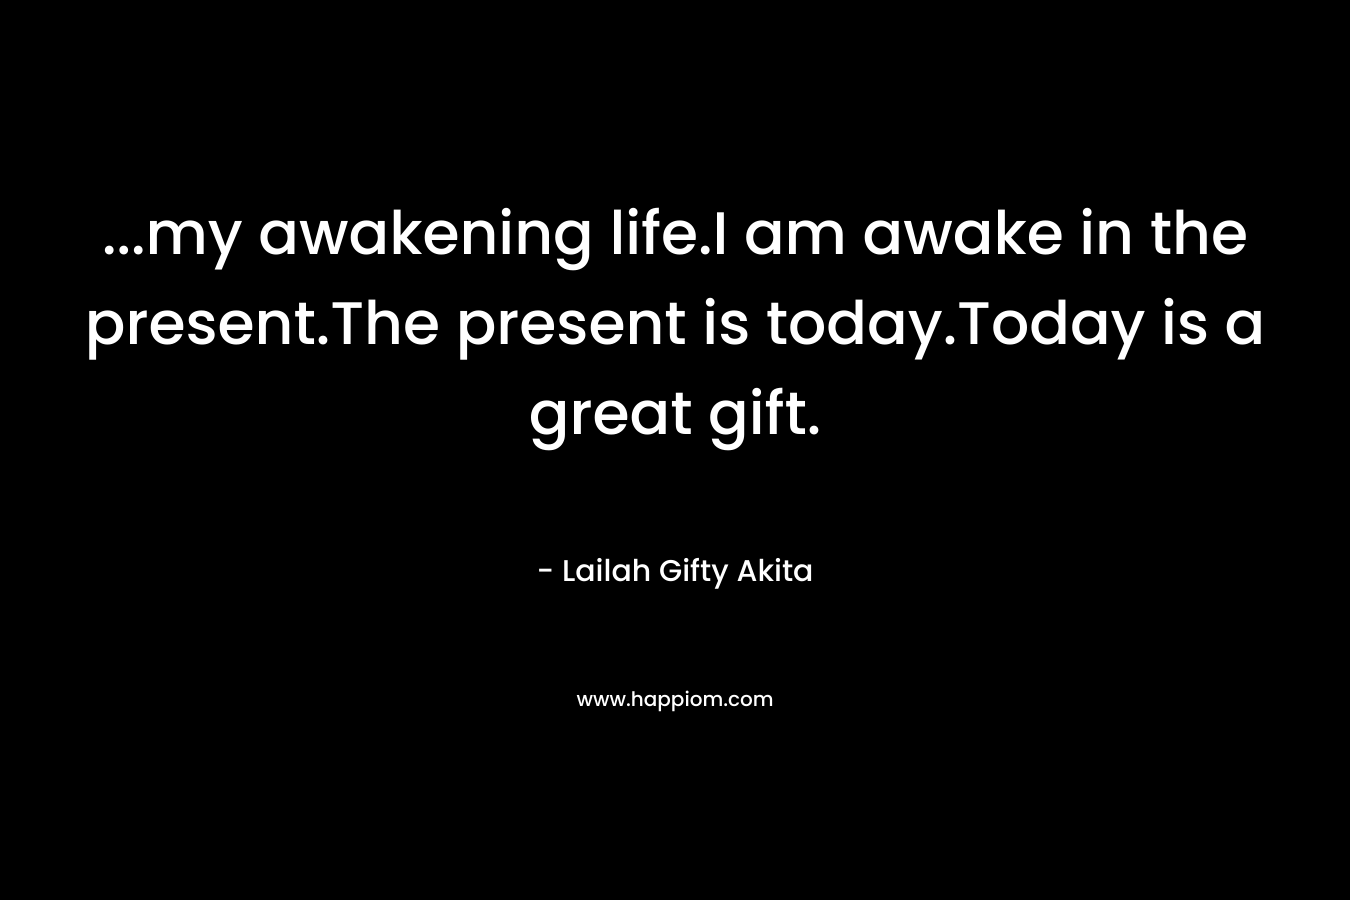 …my awakening life.I am awake in the present.The present is today.Today is a great gift. – Lailah Gifty Akita